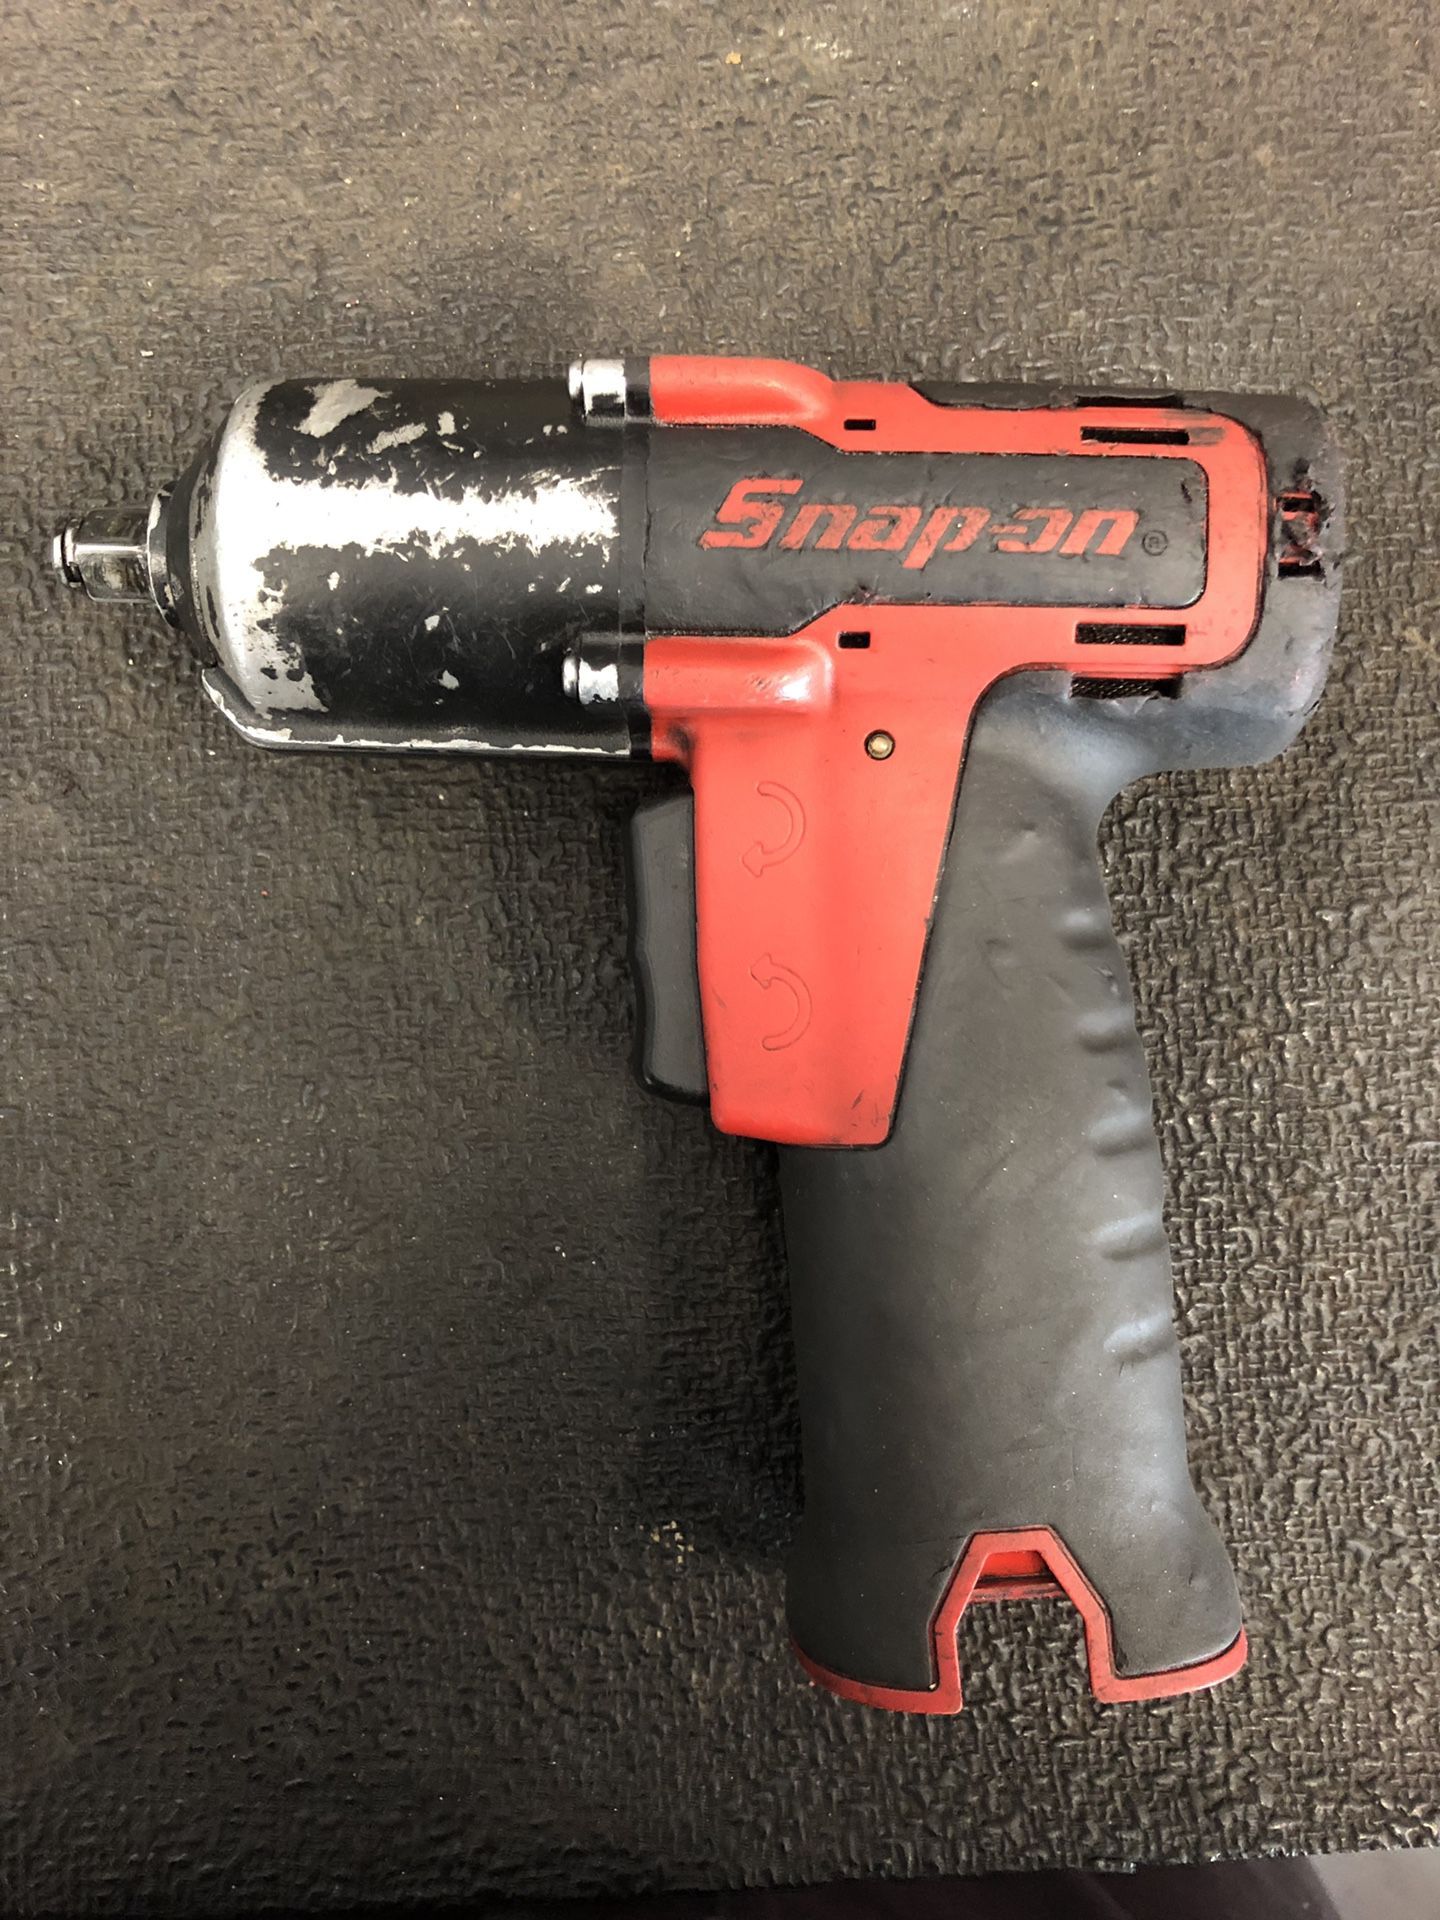 3/8 Snap on impact wrench CT761